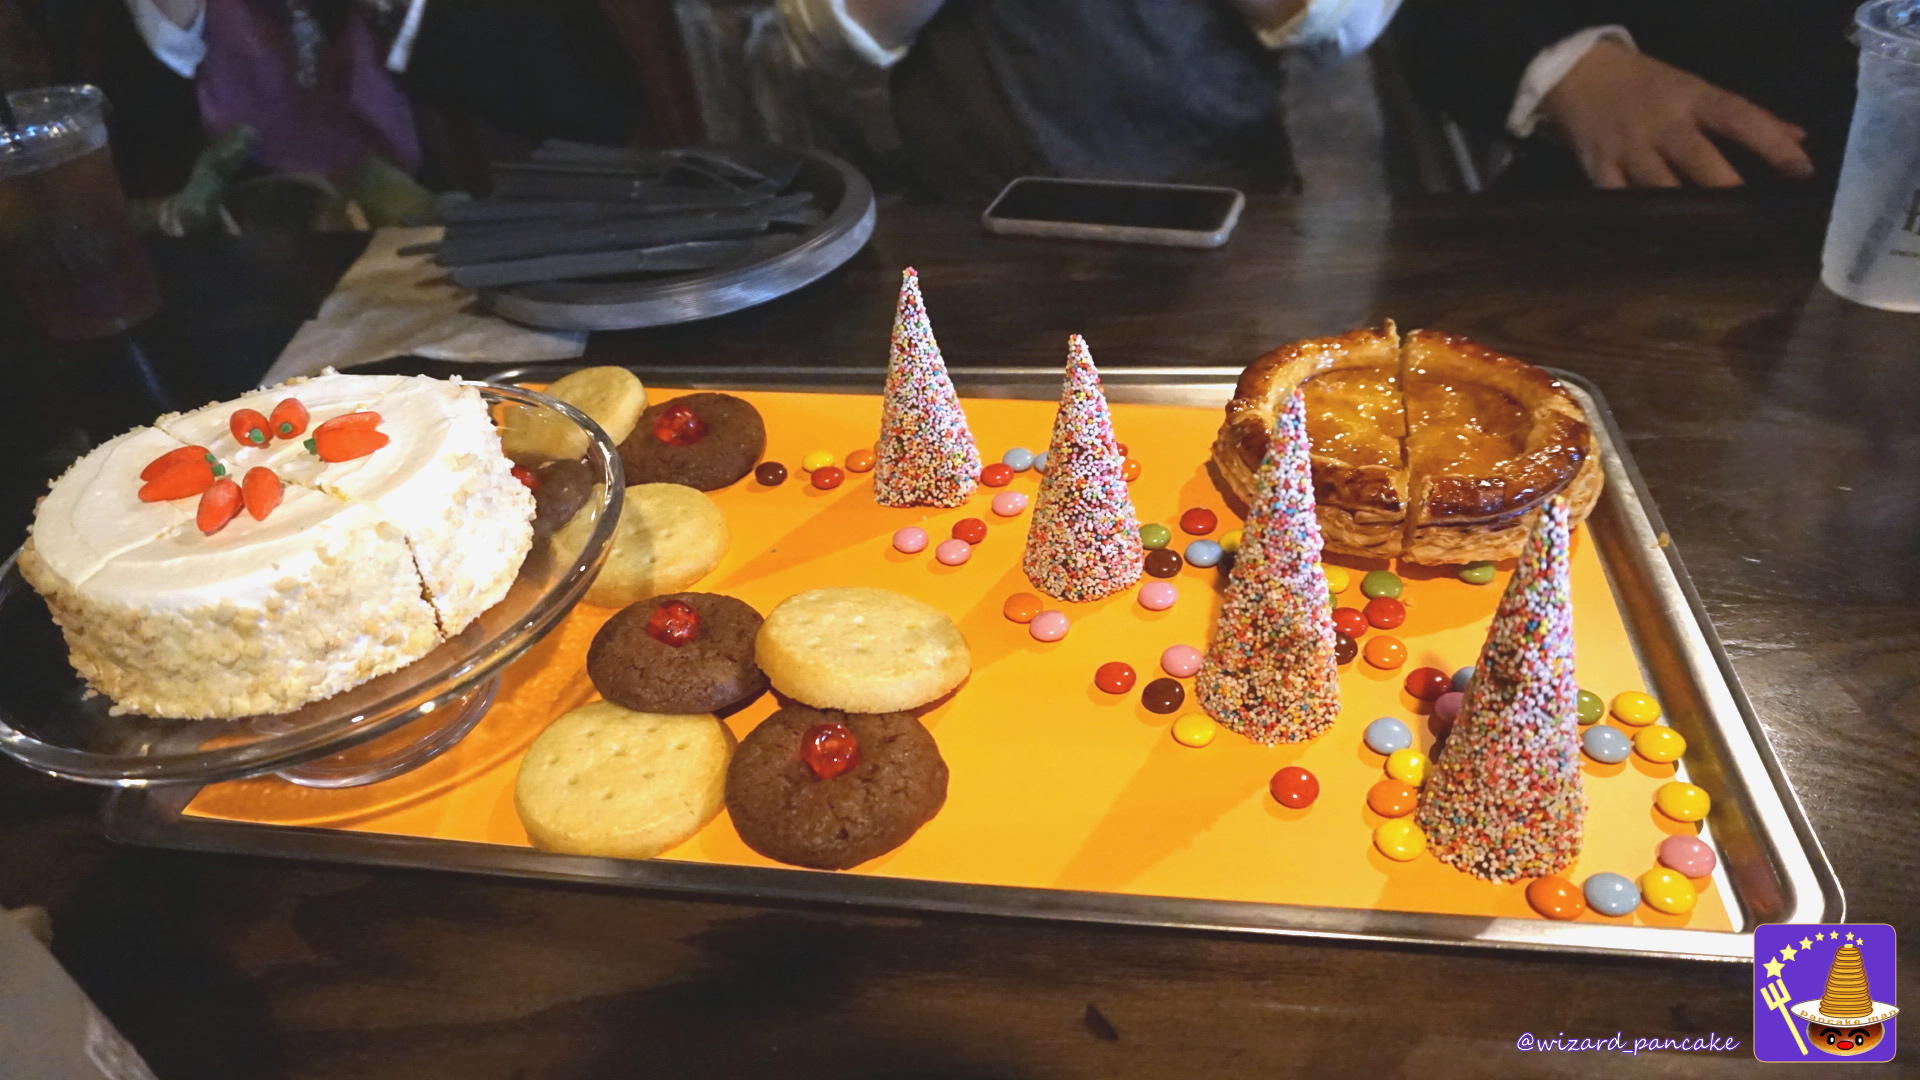 The Three Broomsticks Halloween Dessert Feast, faithful to the sweets that appear in the Hogwarts Great Hall in the film Harriotta (USJ Harry Potter Area).